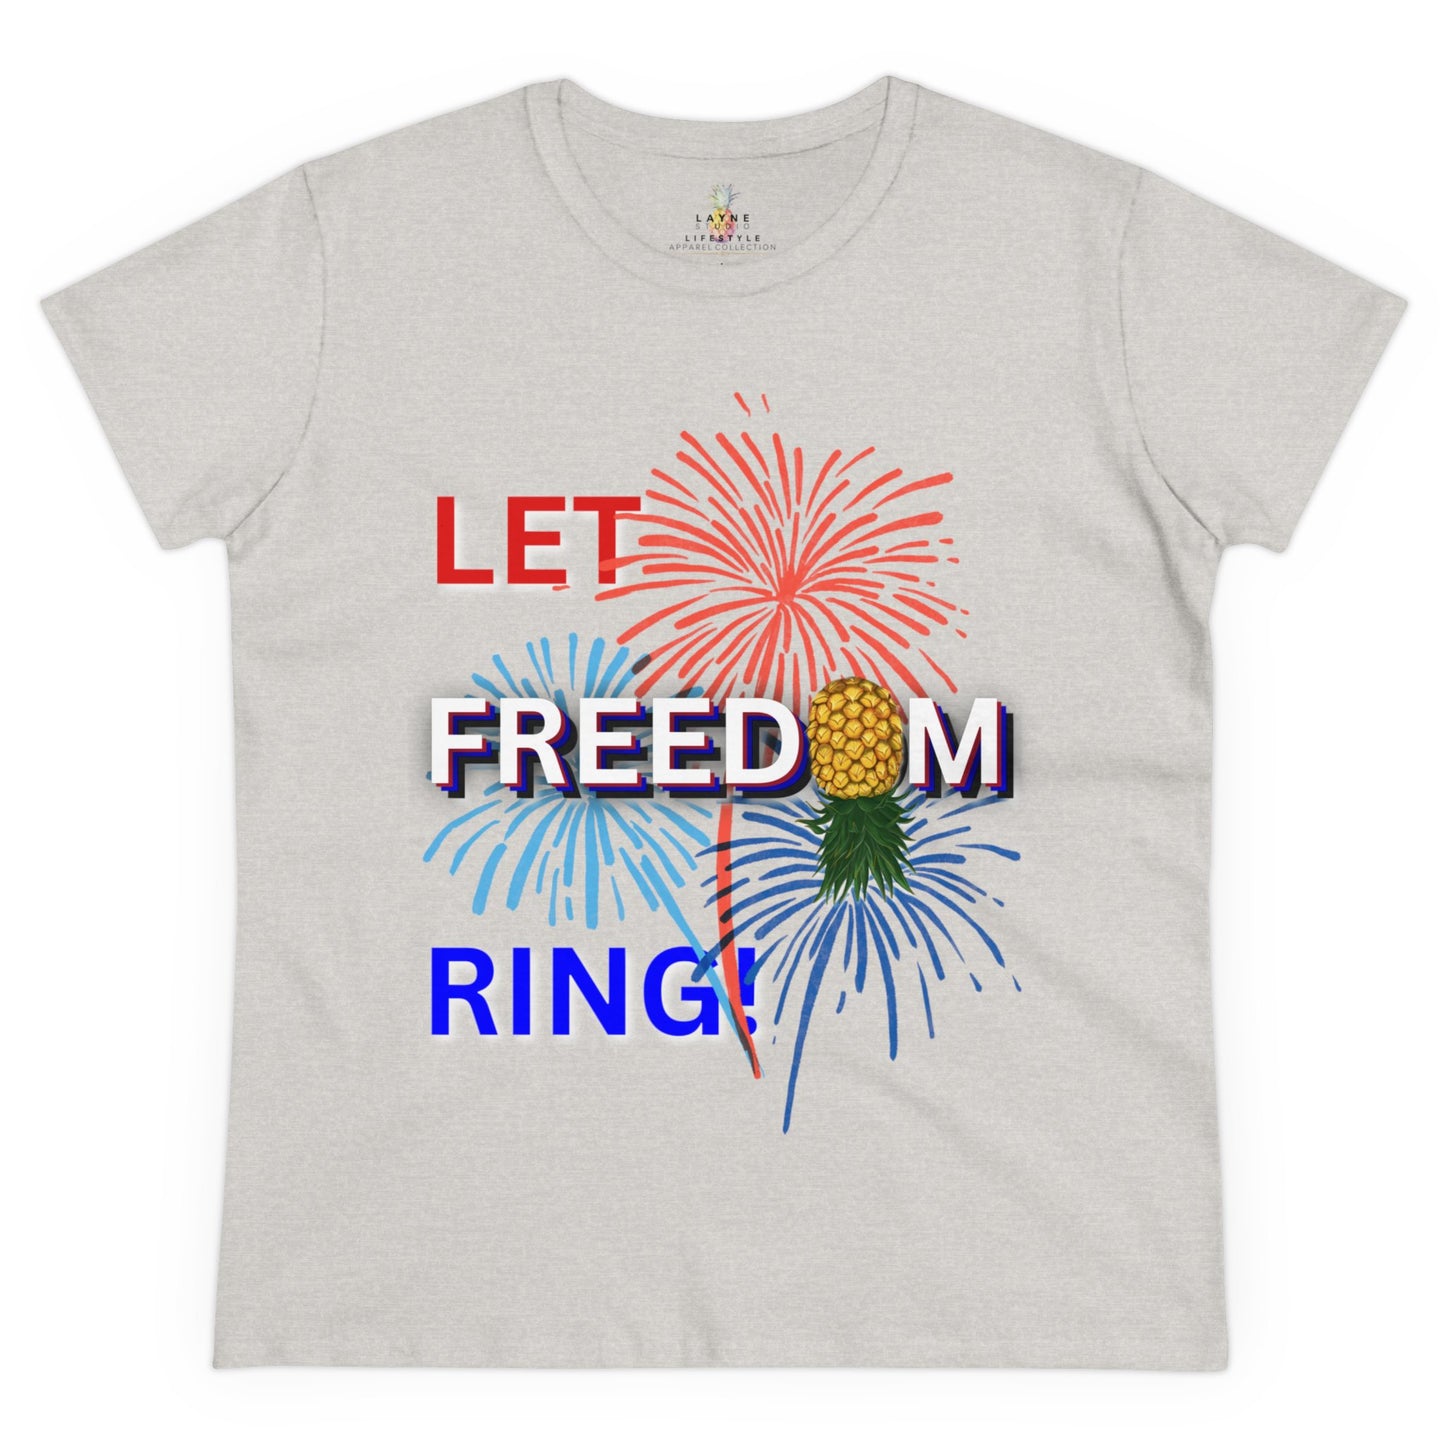 "Let Freedom Ring" Graphic Women's Midweight Cotton Tee